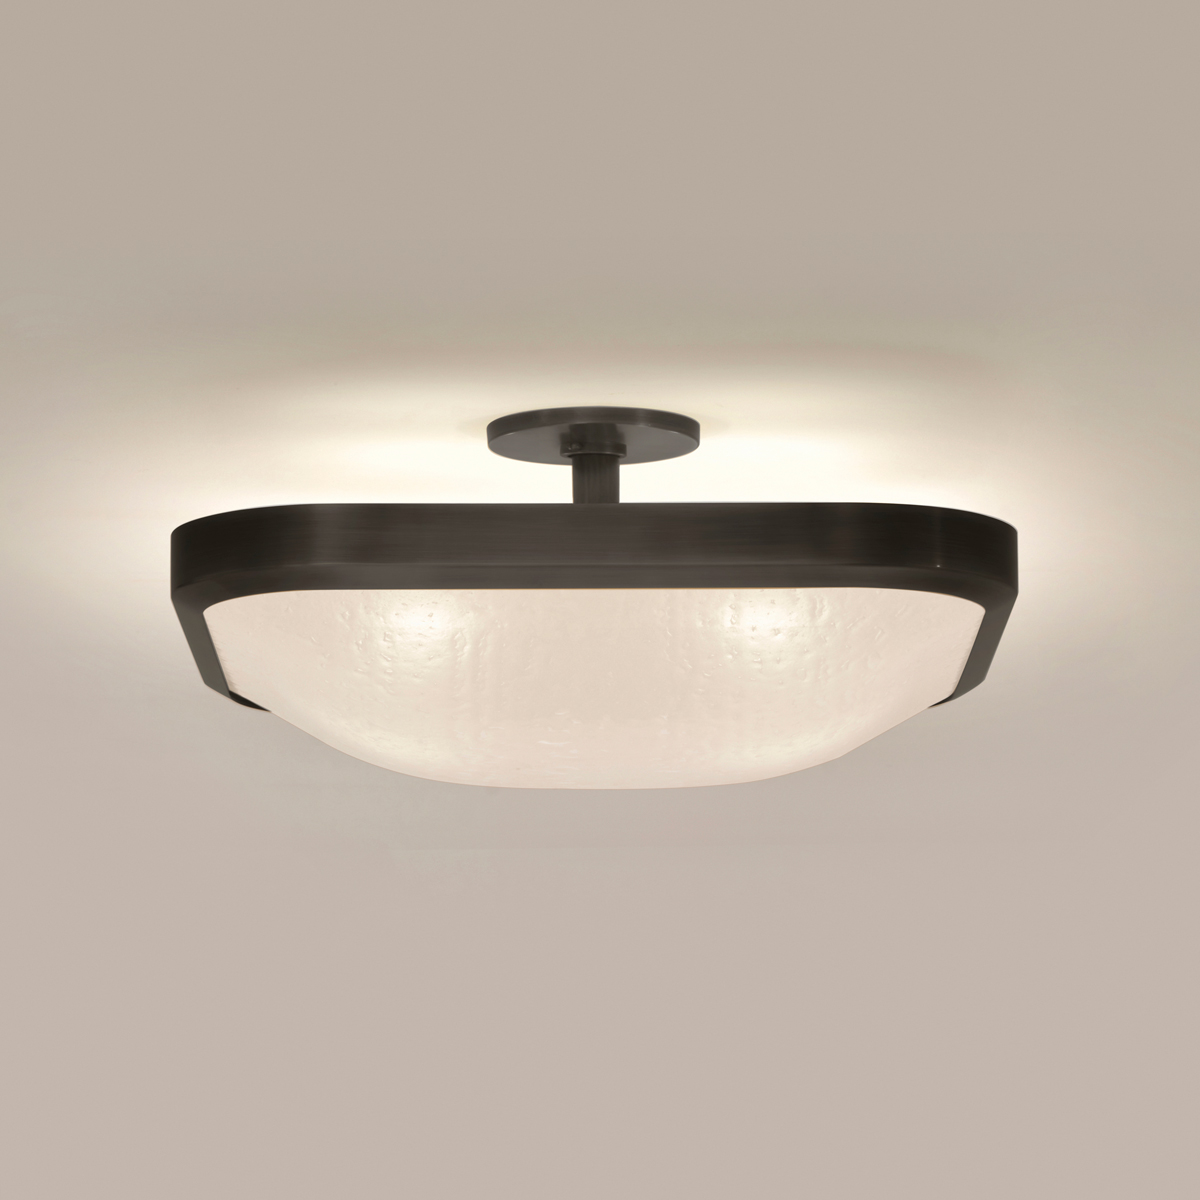 Uno Square Ceiling Light by Gaspare Asaro